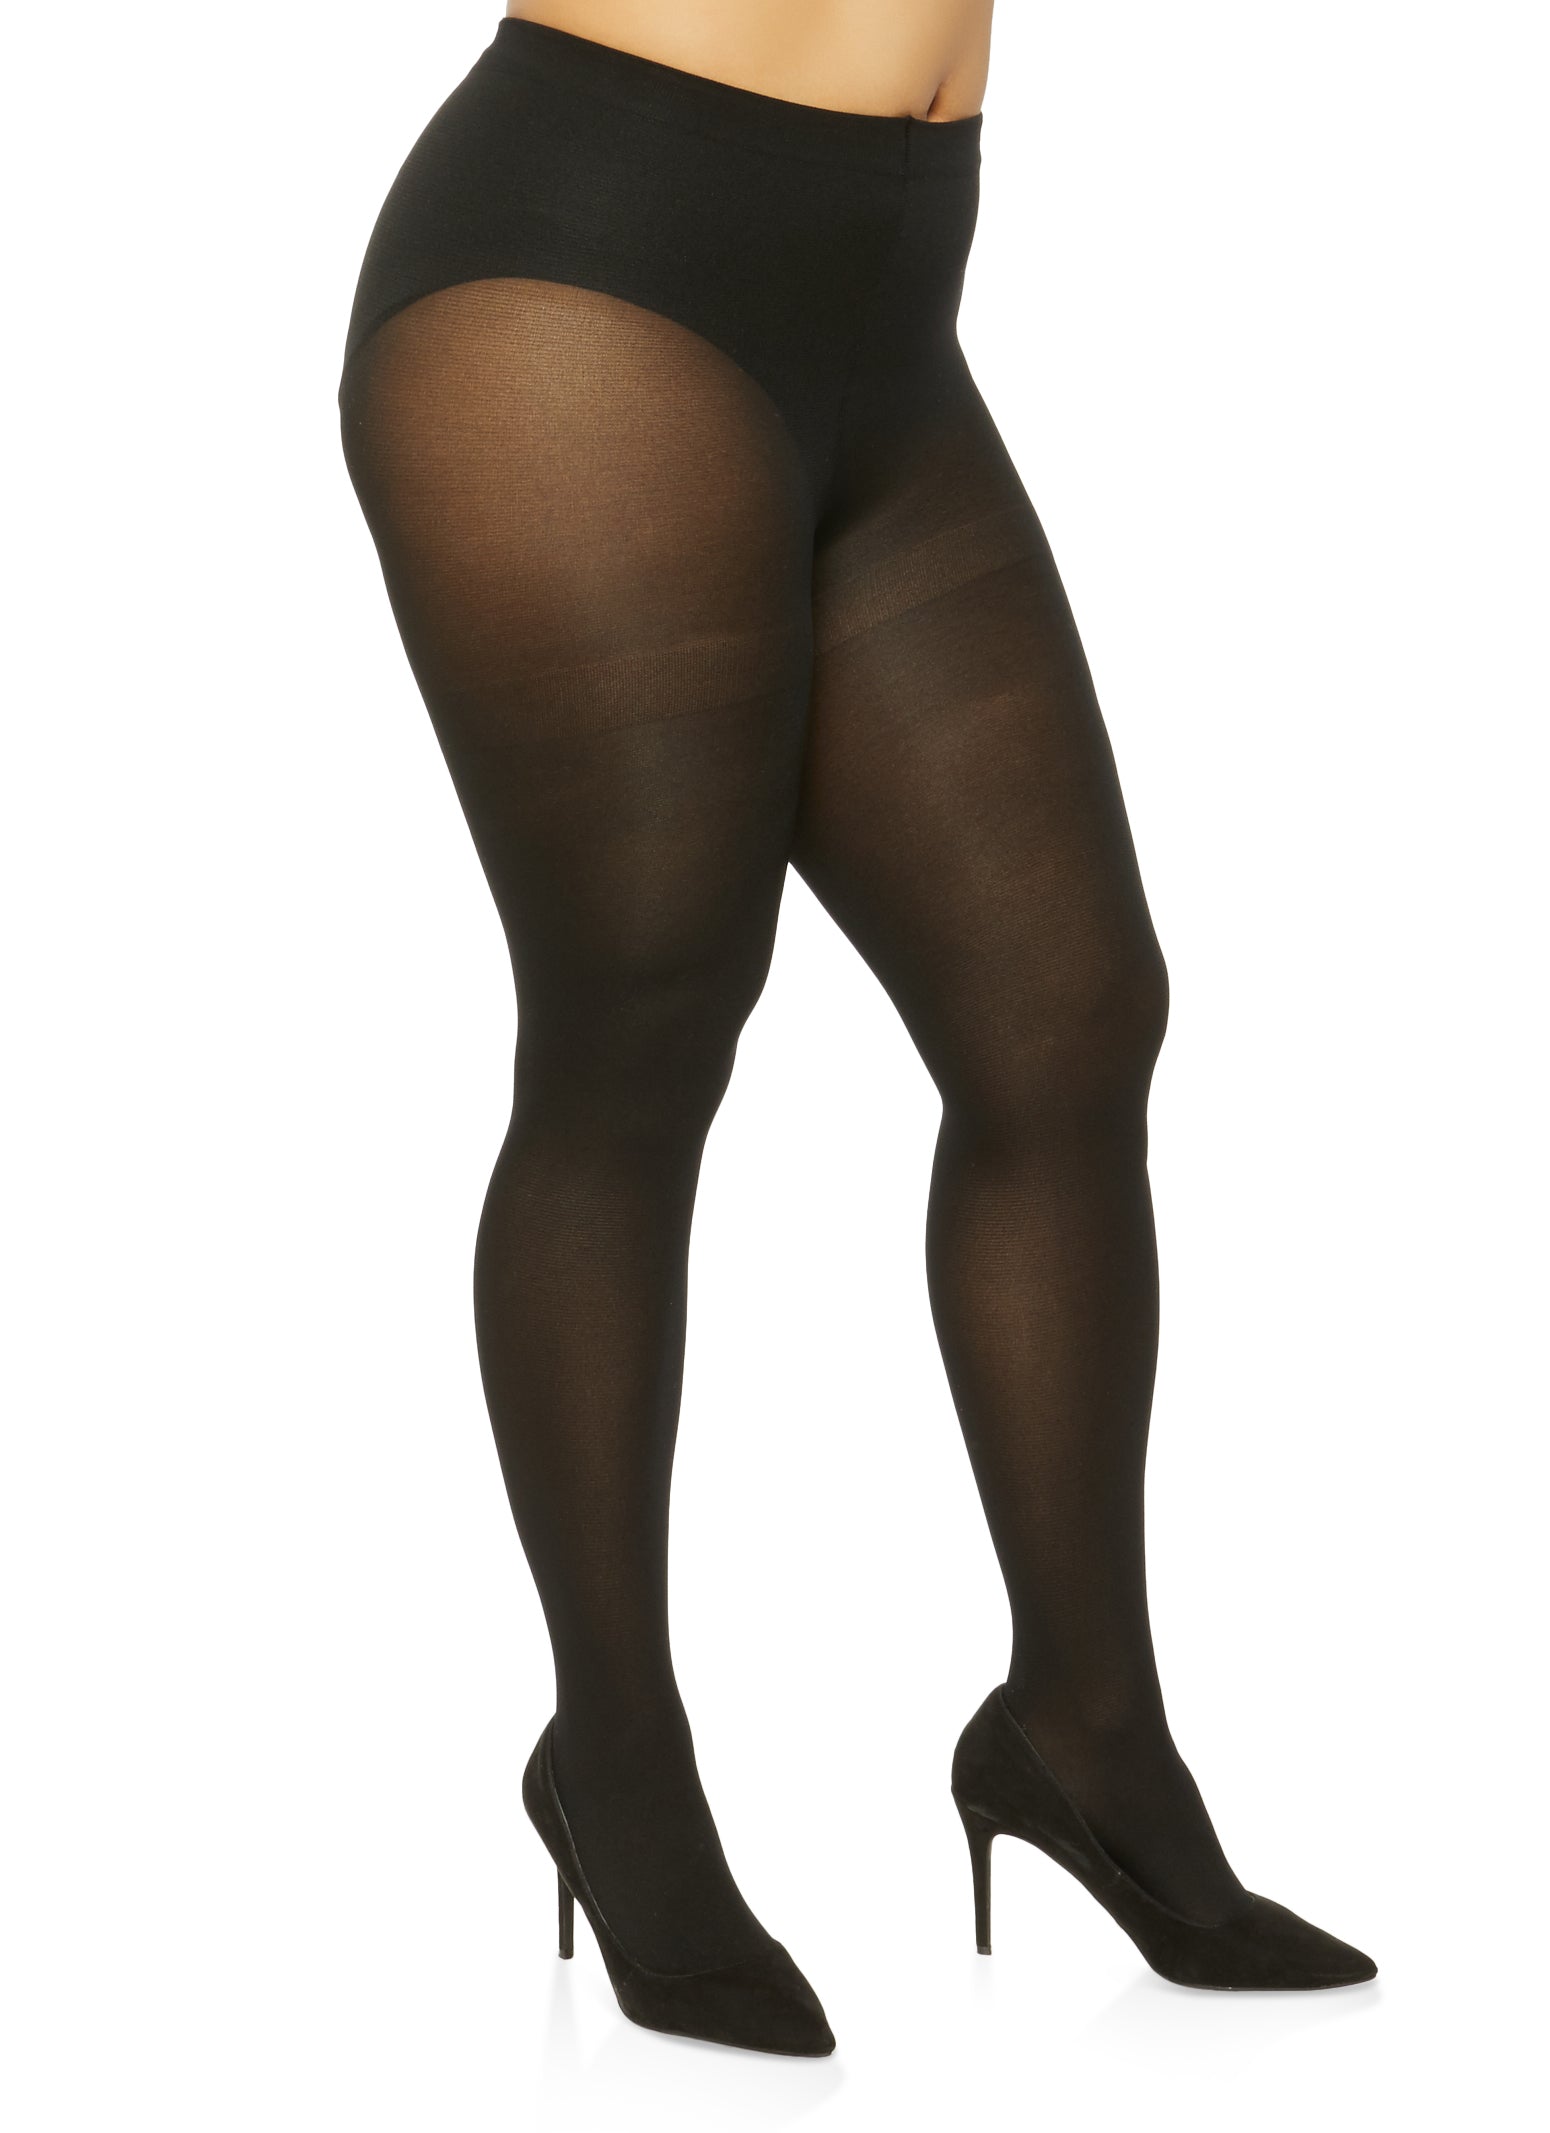 Thick Black Tights. by MiataPlay - The Exchange - Community - The